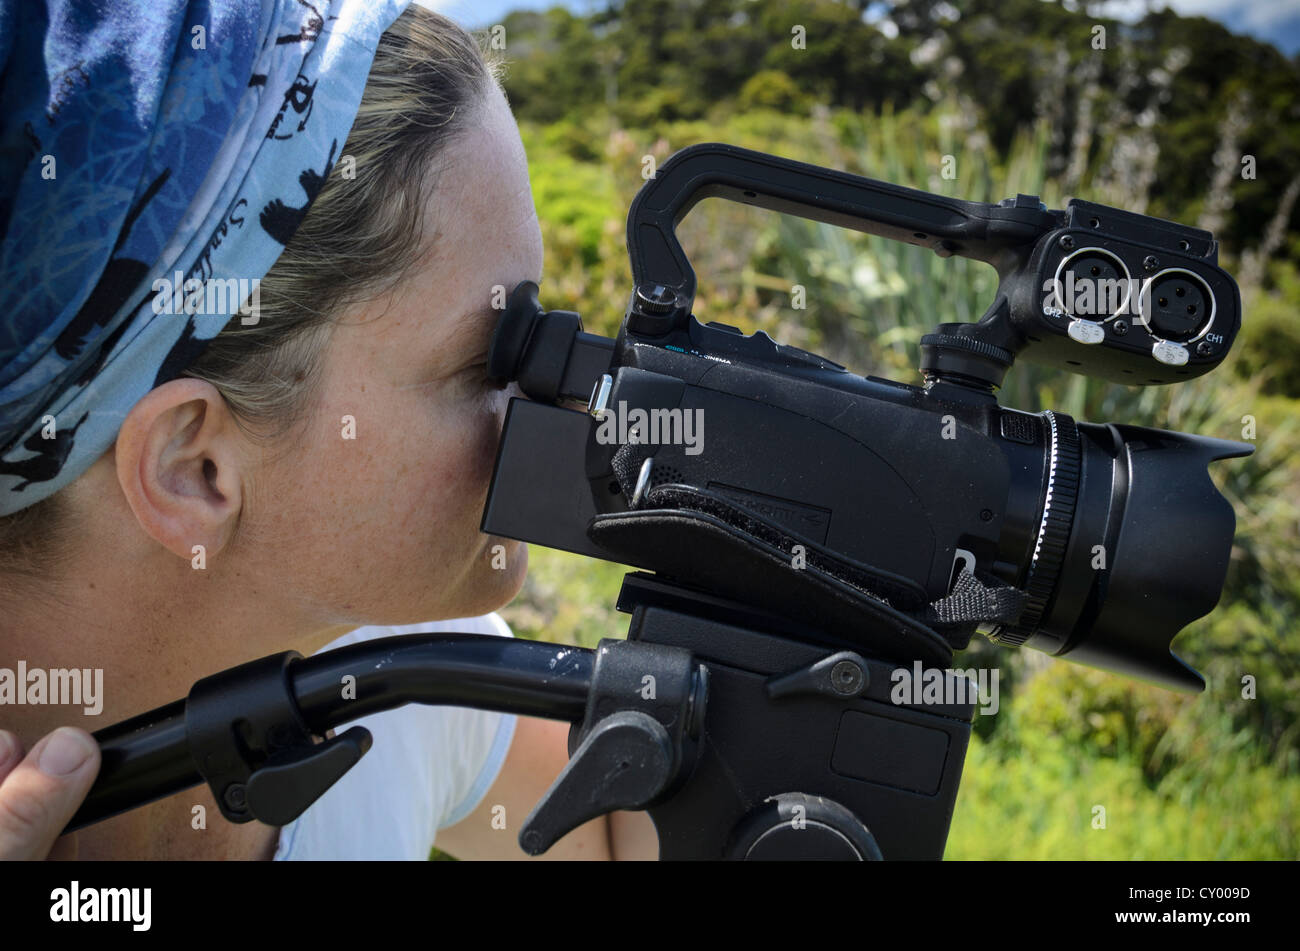 Young woman looking through the viewfinder of a HD-video camera on a tripod, New Zealand, Oceania Stock Photo